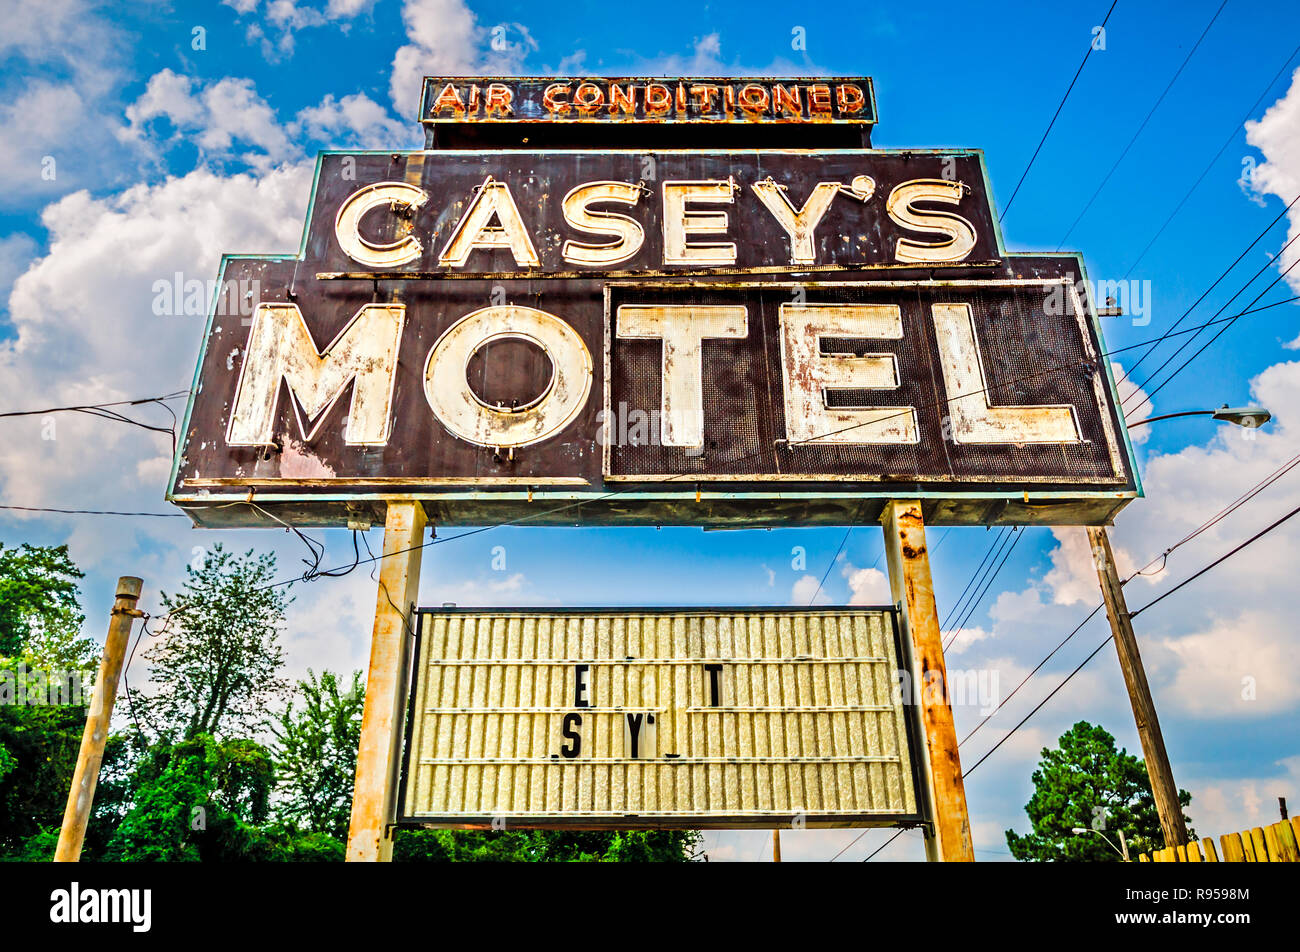 A rusting sign advertises Casey’s Motel on Elvis Presley Boulevard, Sept. 3, 2015, in Memphis, Tennessee. Stock Photo